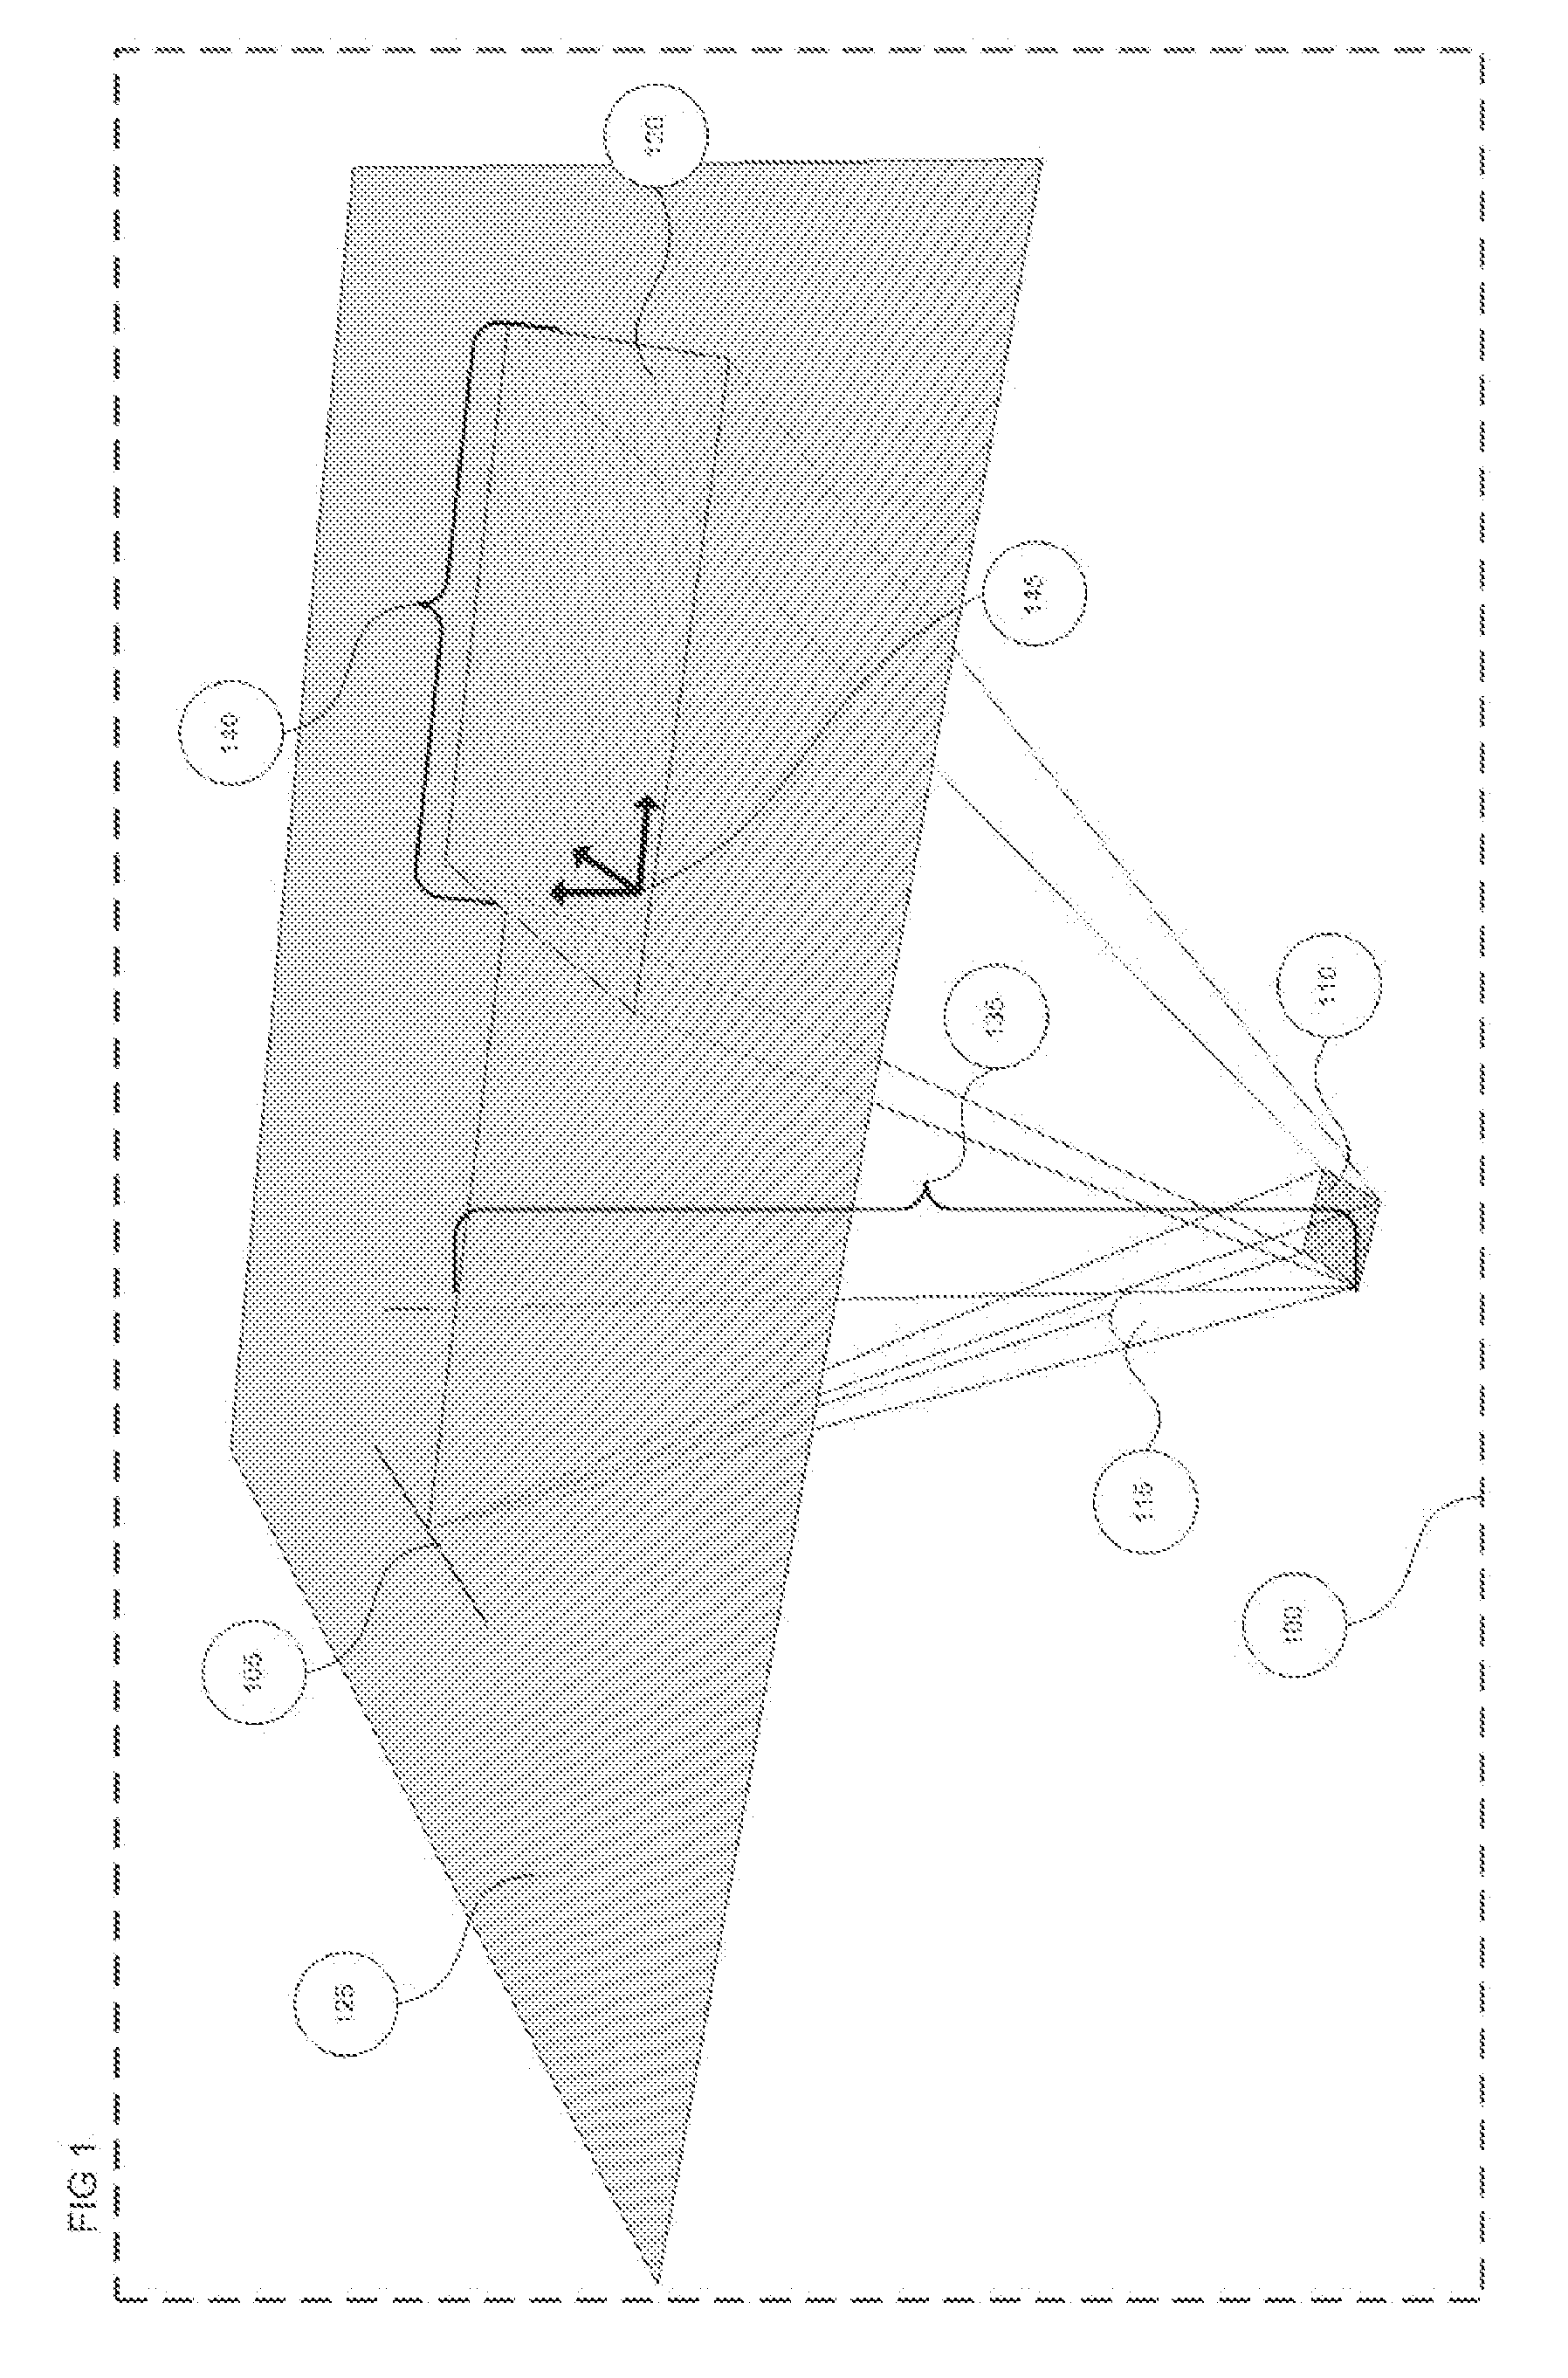 System and Method Using Near and Far Field ULF and ELF Interferometry Synthetic Aperture Radar for Subsurface Imaging